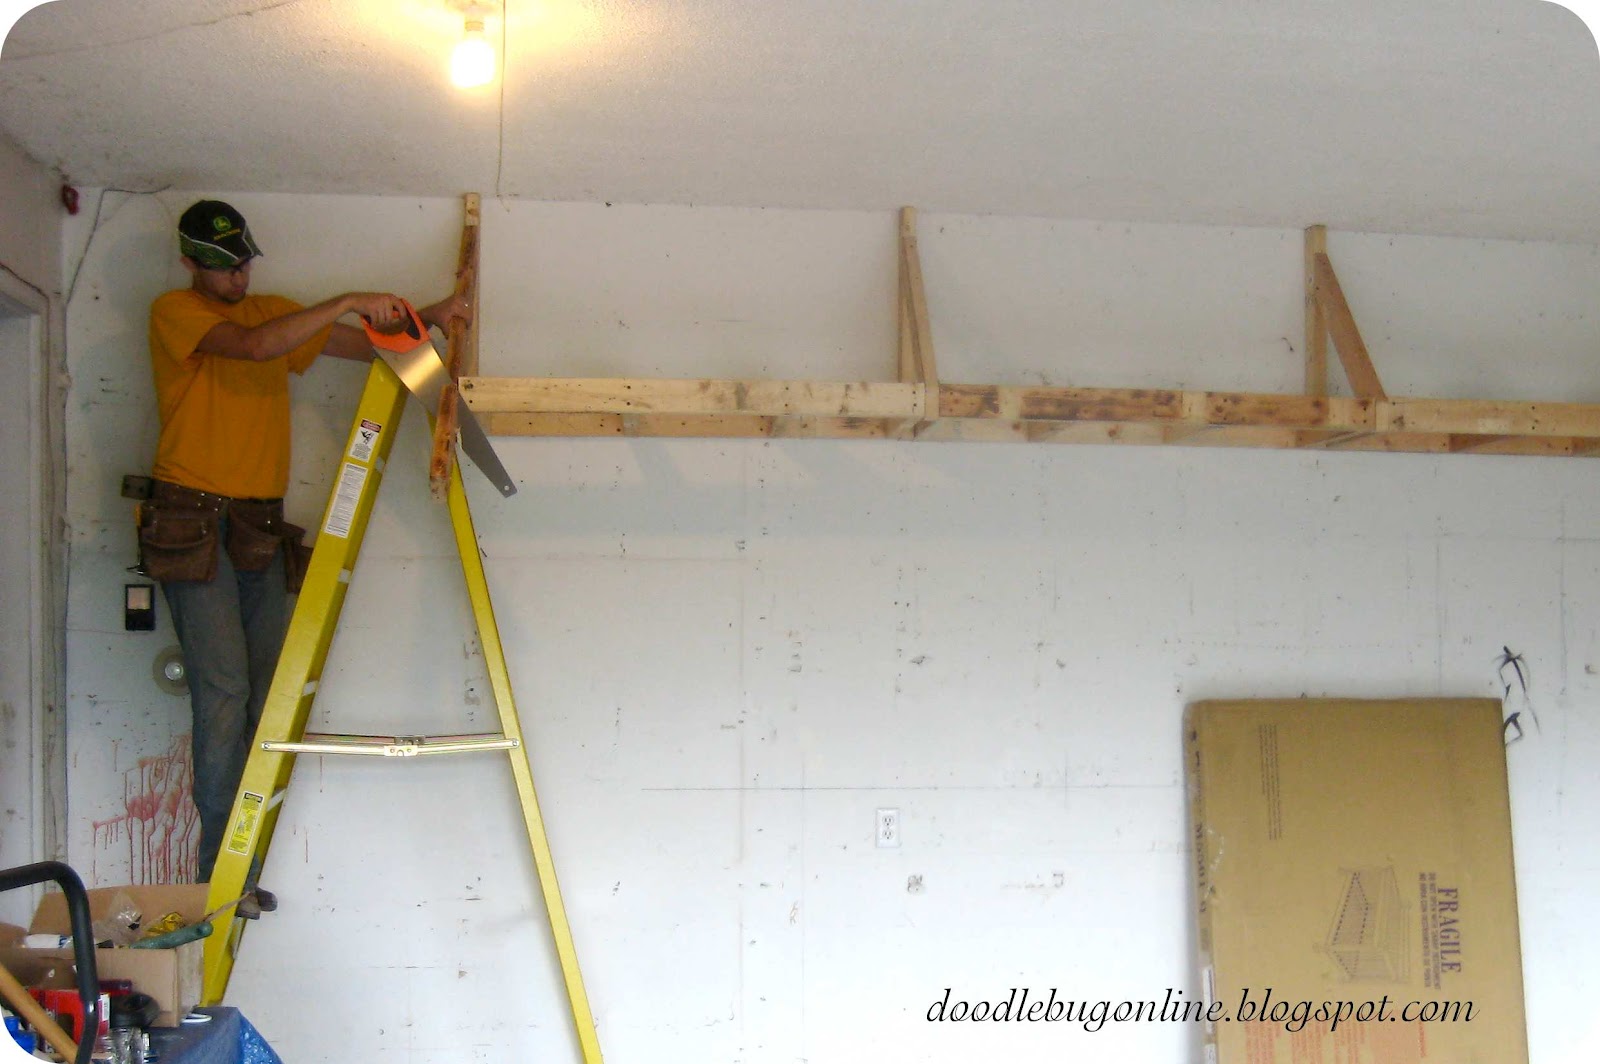 Higher Wall Shelves for occasional-use storage - The Garage Journal ...